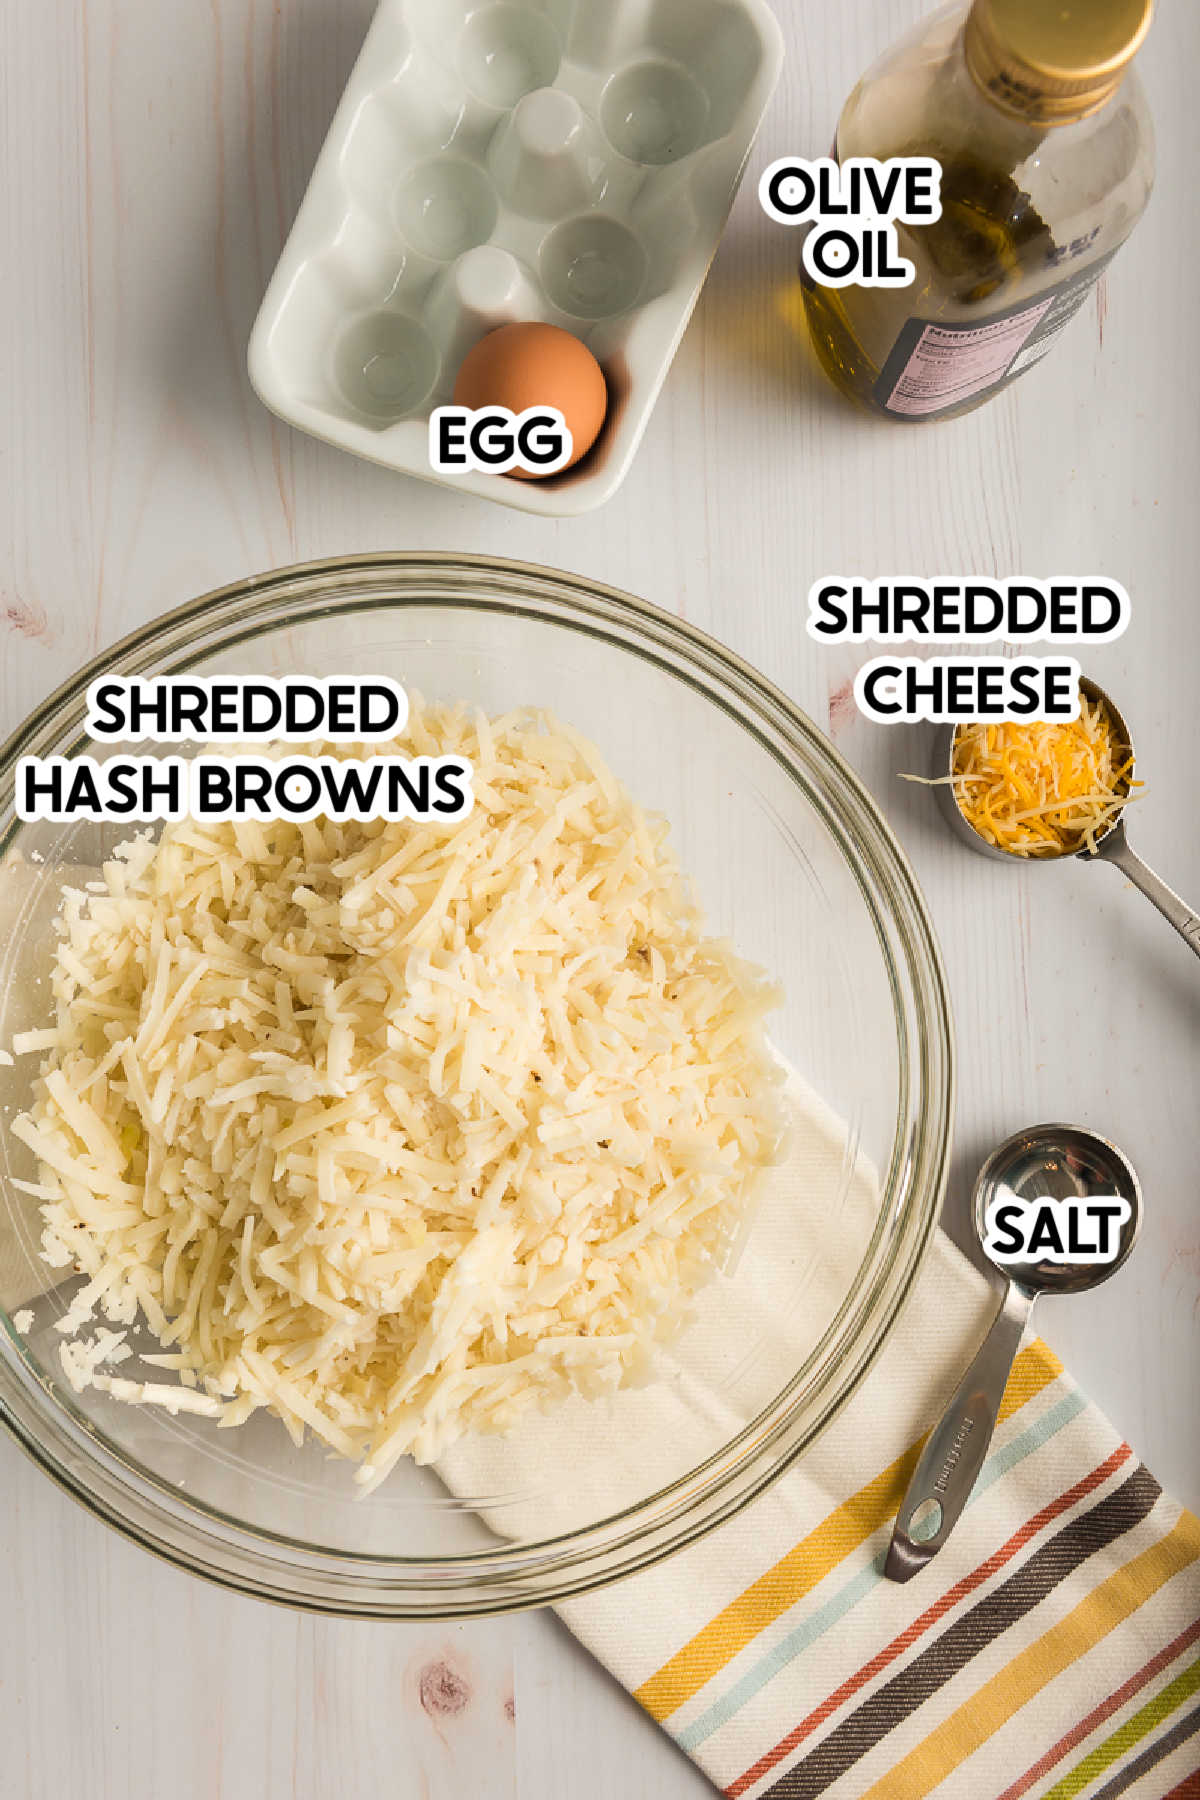 Glass bowl with hash browns and other ingredients with text labels on top